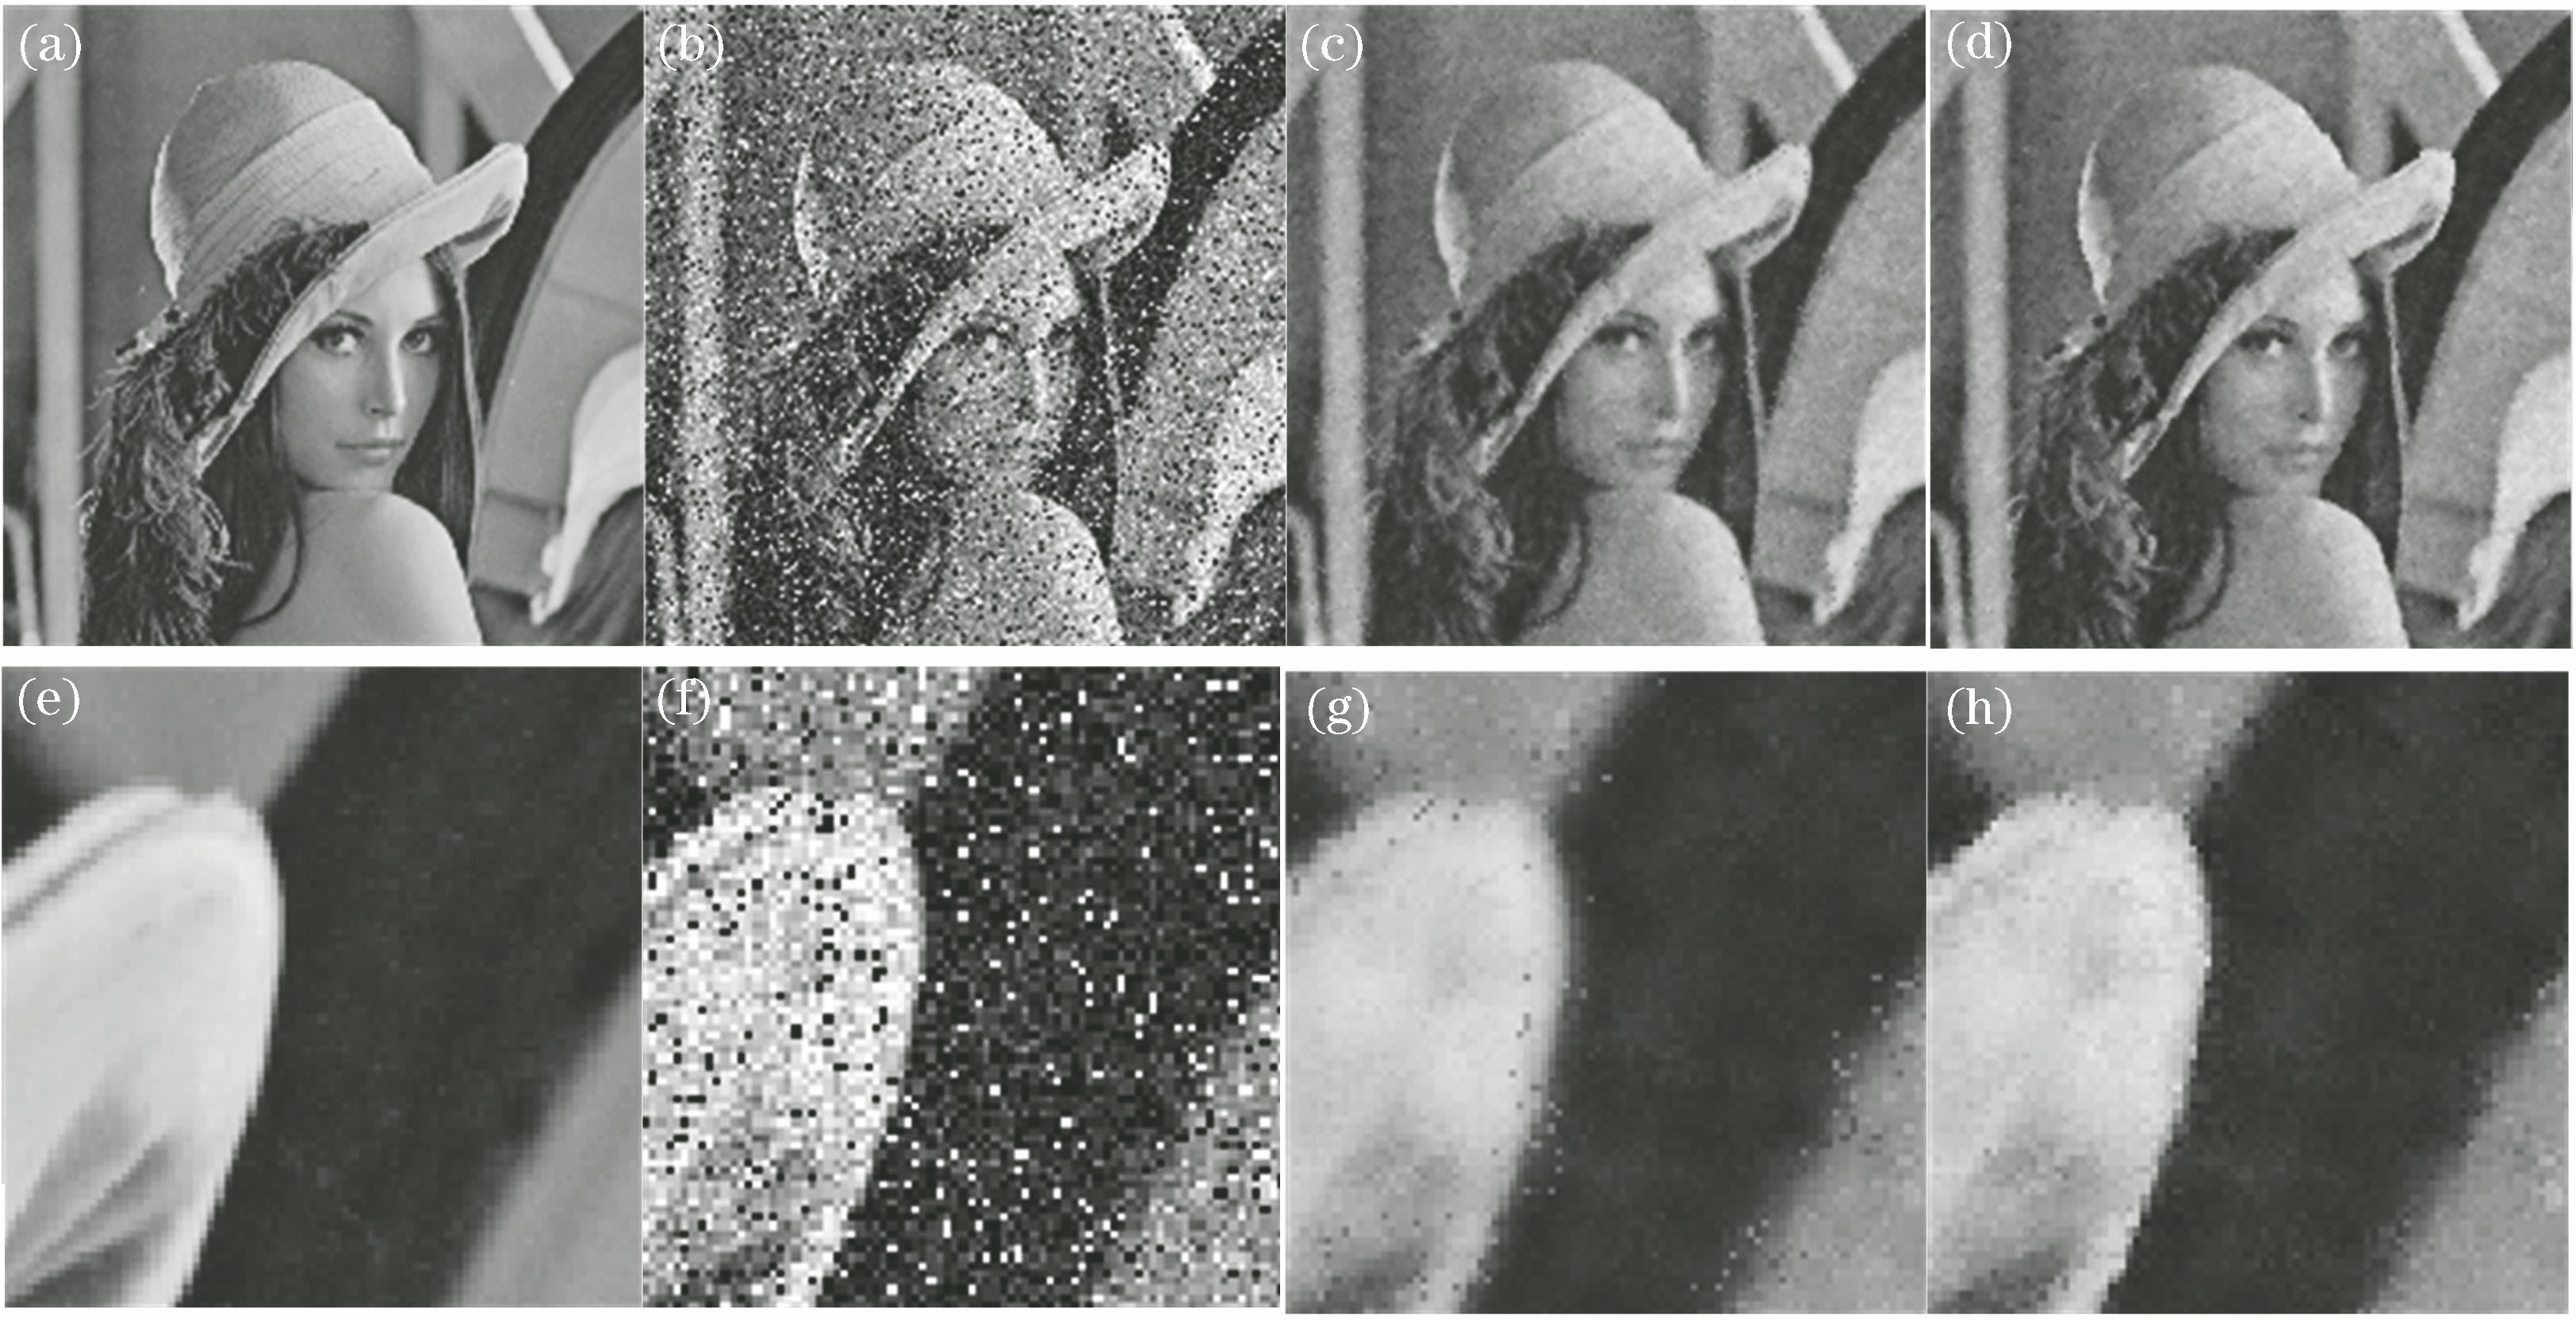 Comparison of denoising results of Lena image. (a) Original image; (b) noisy image; (c) denoising result of method in Ref.[10]; (d) denoising result of proposed method; (e) local image in Fig. 2 (a); (f) local image in Fig. 2 (b); (g) local image in Fig. 2 (c); (h) local image in Fig. 2 (d)